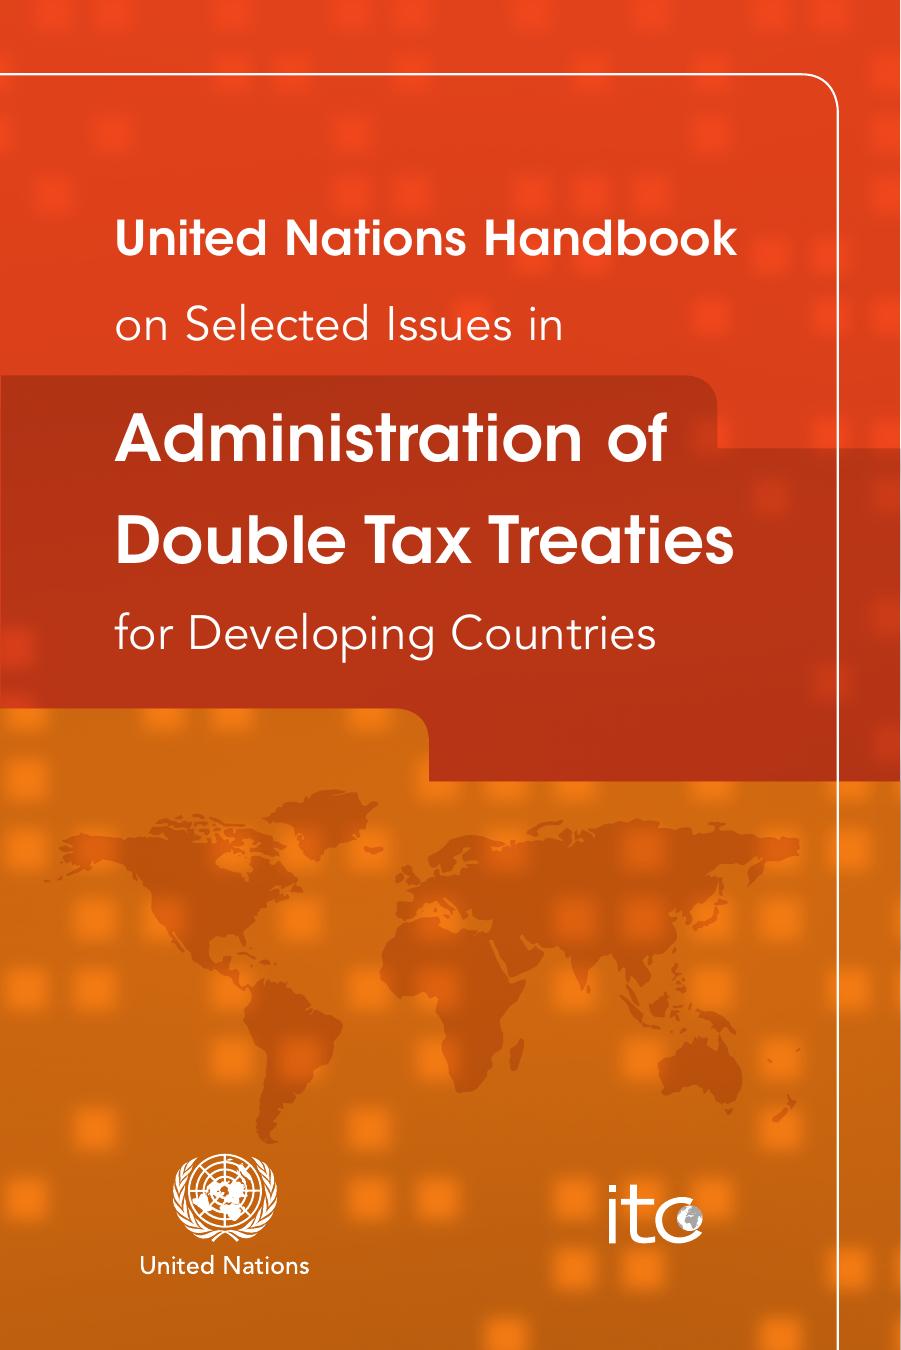 Administration of Double Tax Treaties for Developing Countries 2013